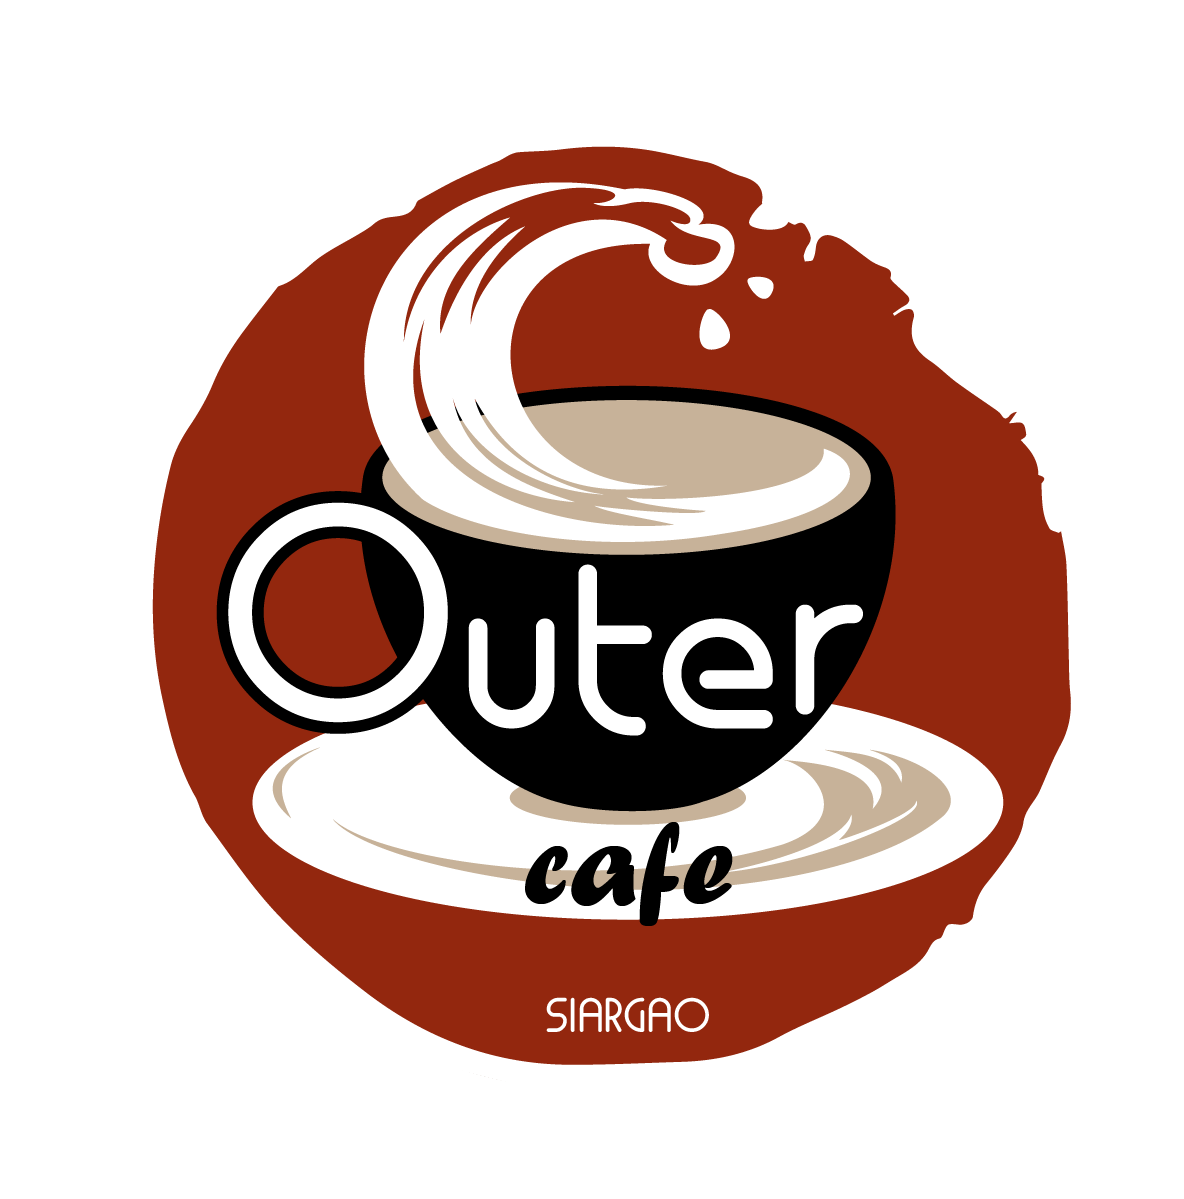 Logo I made for a friend for his Café in Siargao which was destroyed by typhoon Odette. Same name but a new image. Outer Cafe is opening this year. 
#logo #outercafe #siargao #ai #xppen #cafelogo #vernonperez #coffeelovers